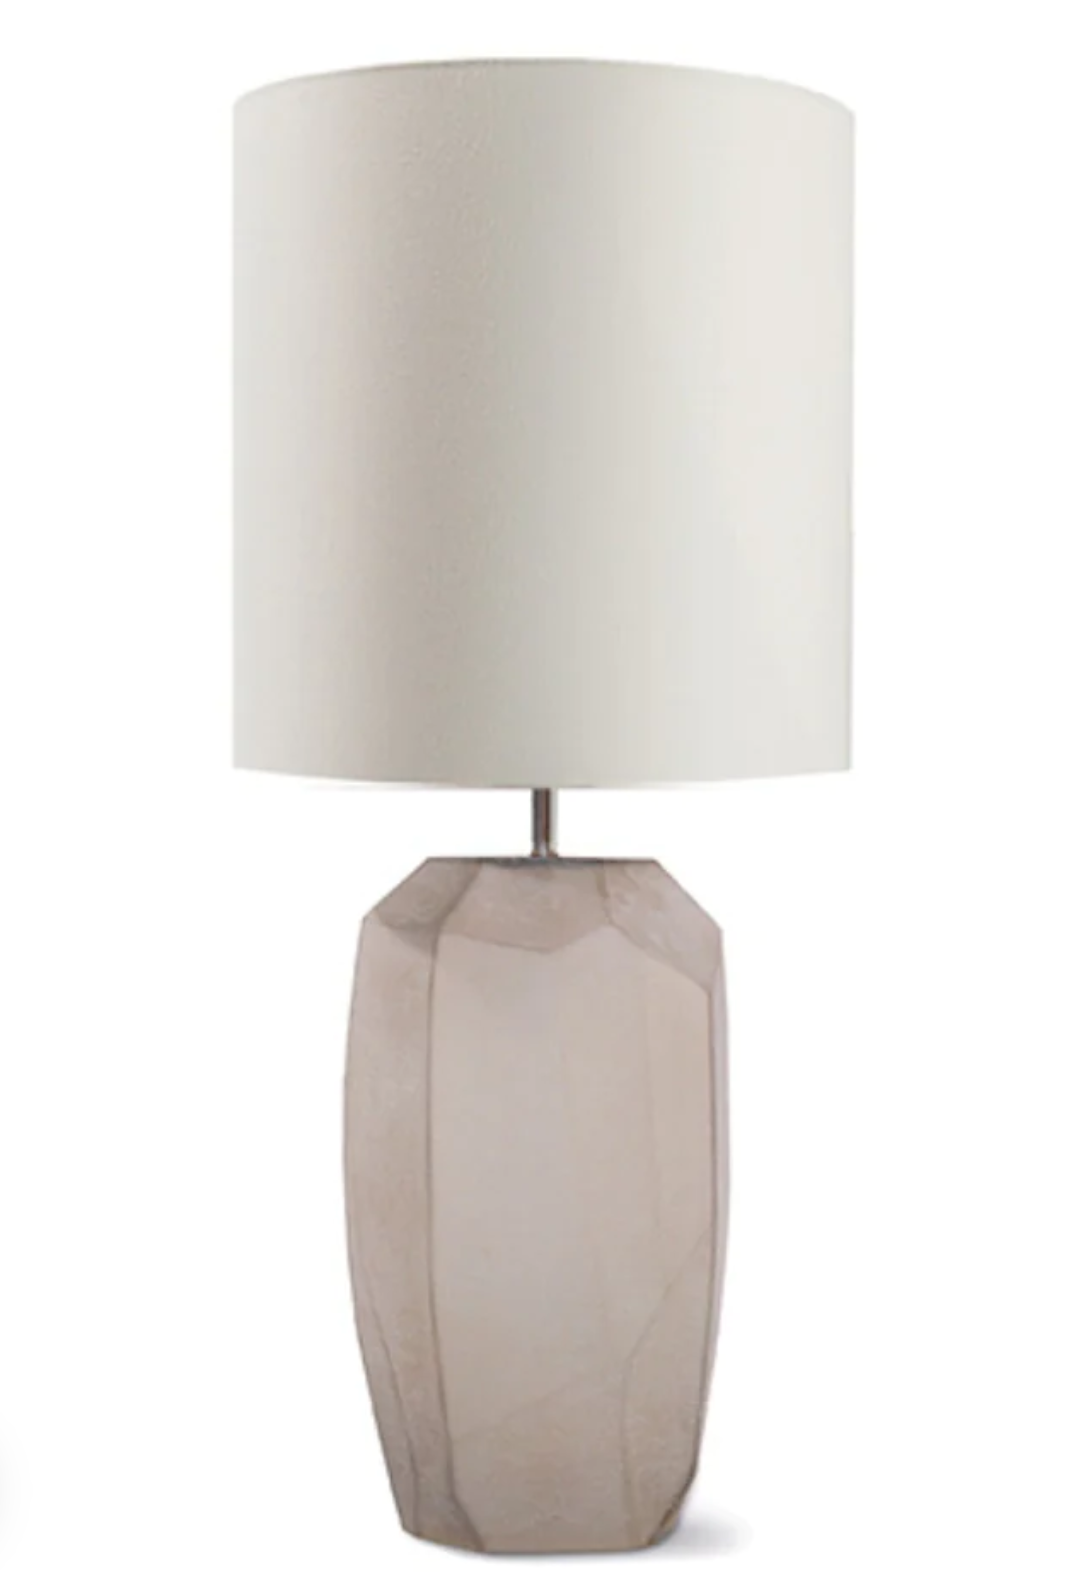 CUBISTIC TALL TABLELAMP | BY GUAXS FROM $1,565.00